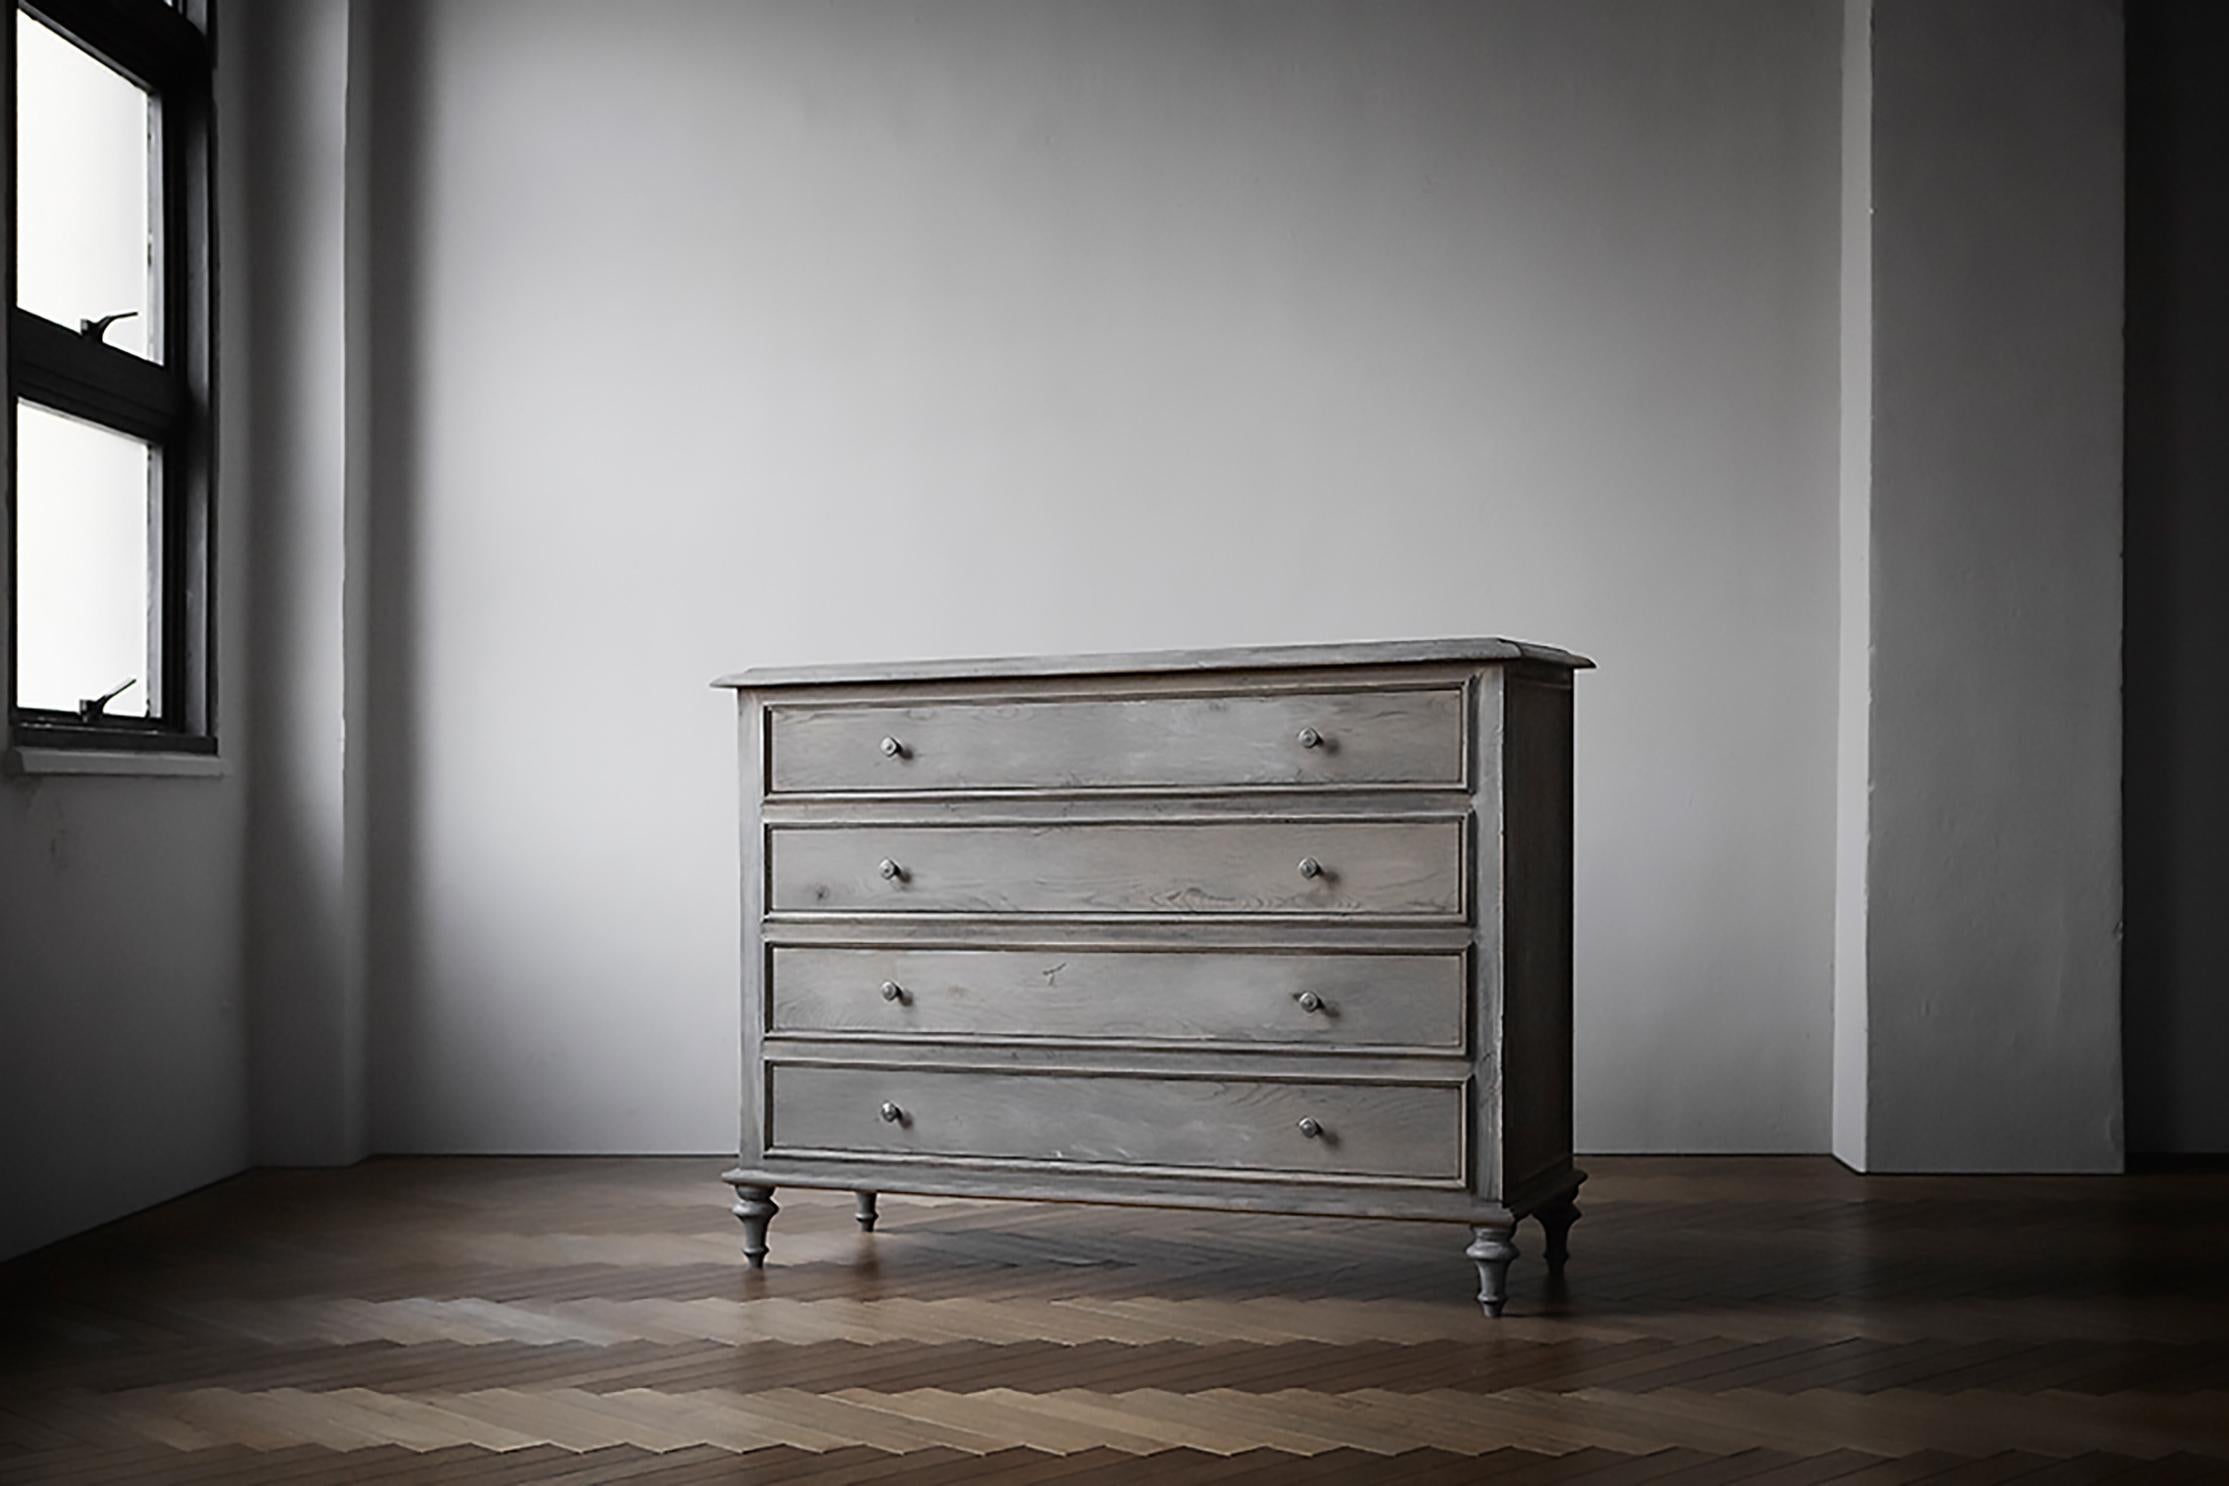 The chic colours and authentic design make this chest of drawers easy to use. At 1200mm wide, this chest of drawers offers plenty of storage space for everything from cluttered household items to out-of-season clothes. The frame of the drawers and